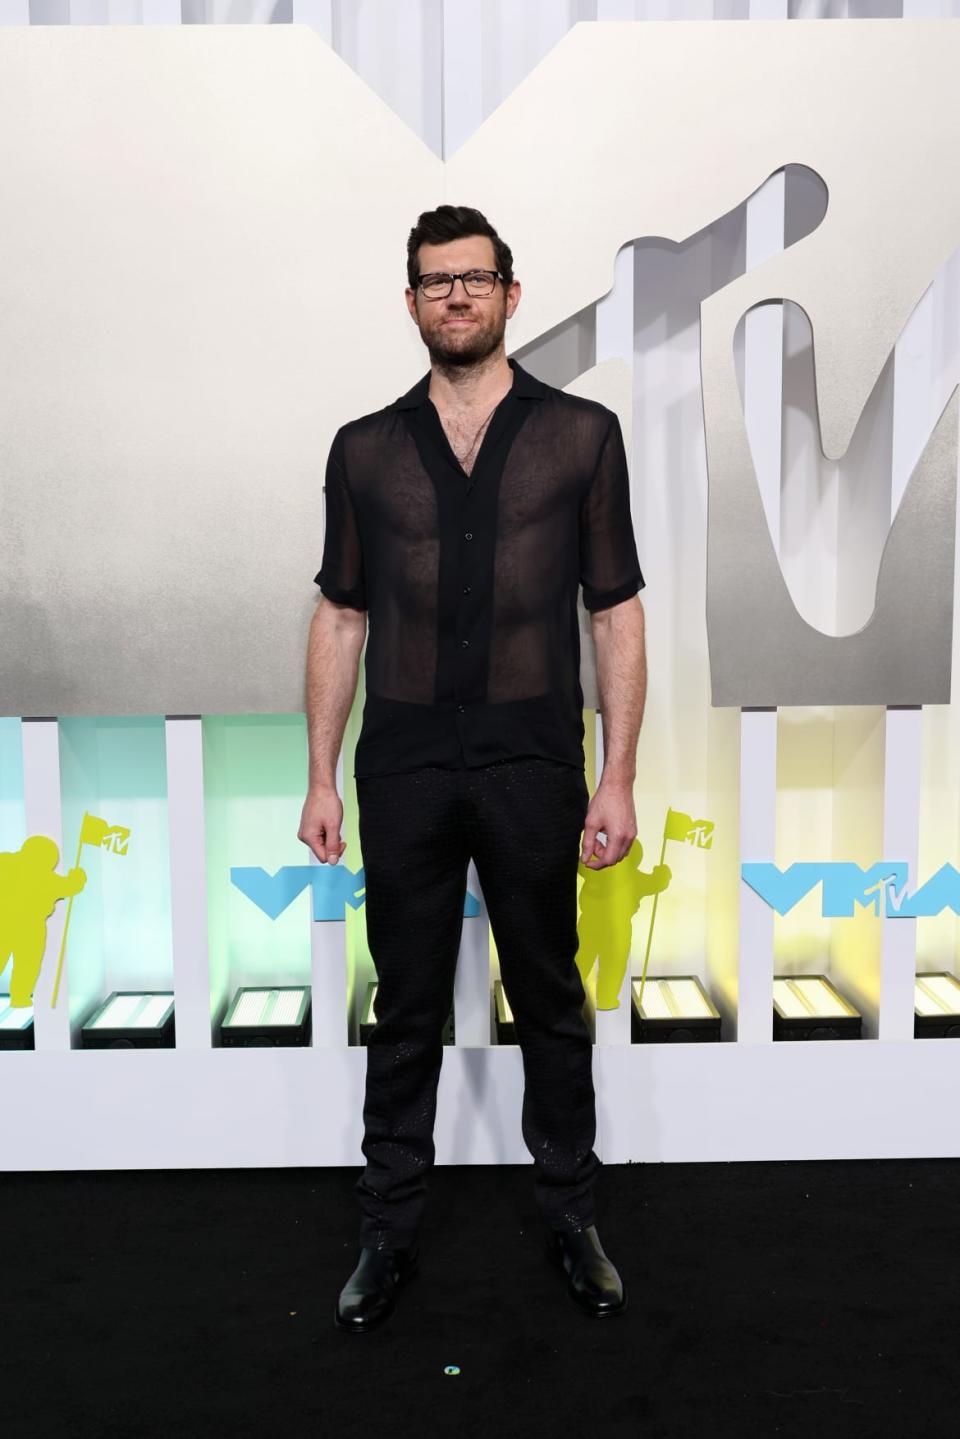 <div class="inline-image__title">Billy Eichner</div> <div class="inline-image__caption"><p>Billy Eichner shows the meeting of pec deck and a lifelong love of "Chicago."</p></div> <div class="inline-image__credit">Dia Dipasupil/Getty</div>